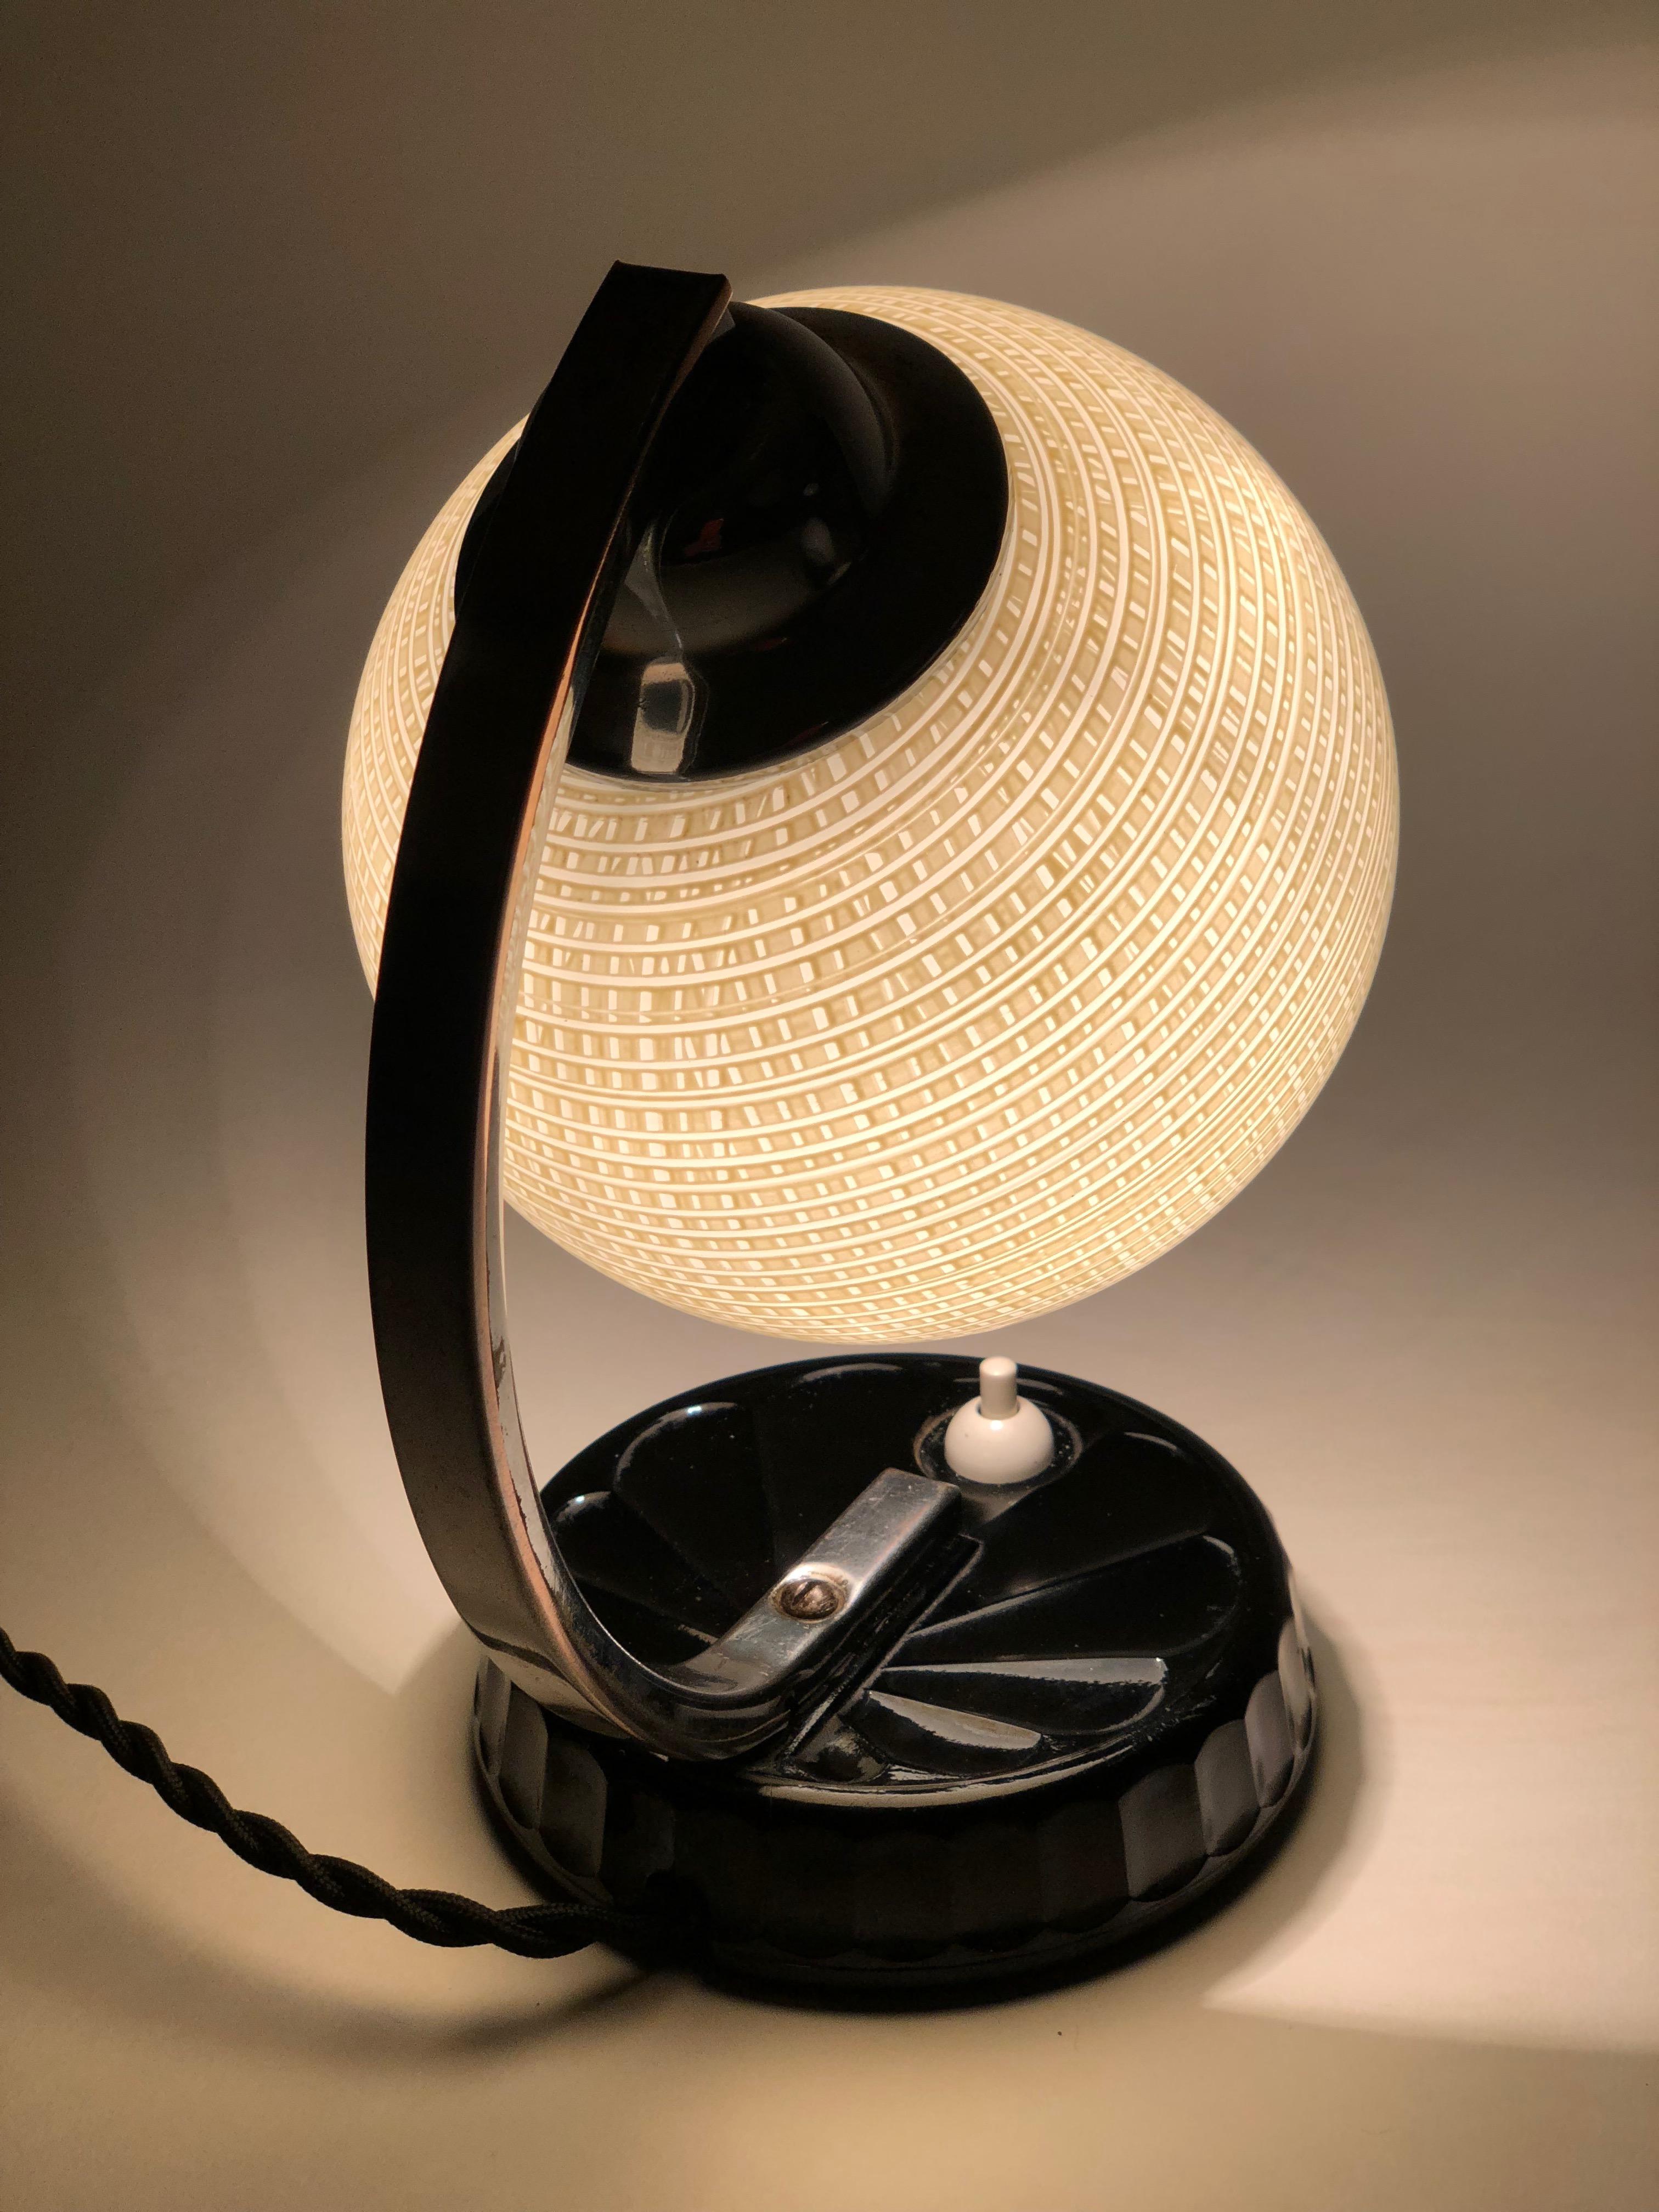 Art Deco Table Lamp from the Czech Republic, from CMS Krasno 1